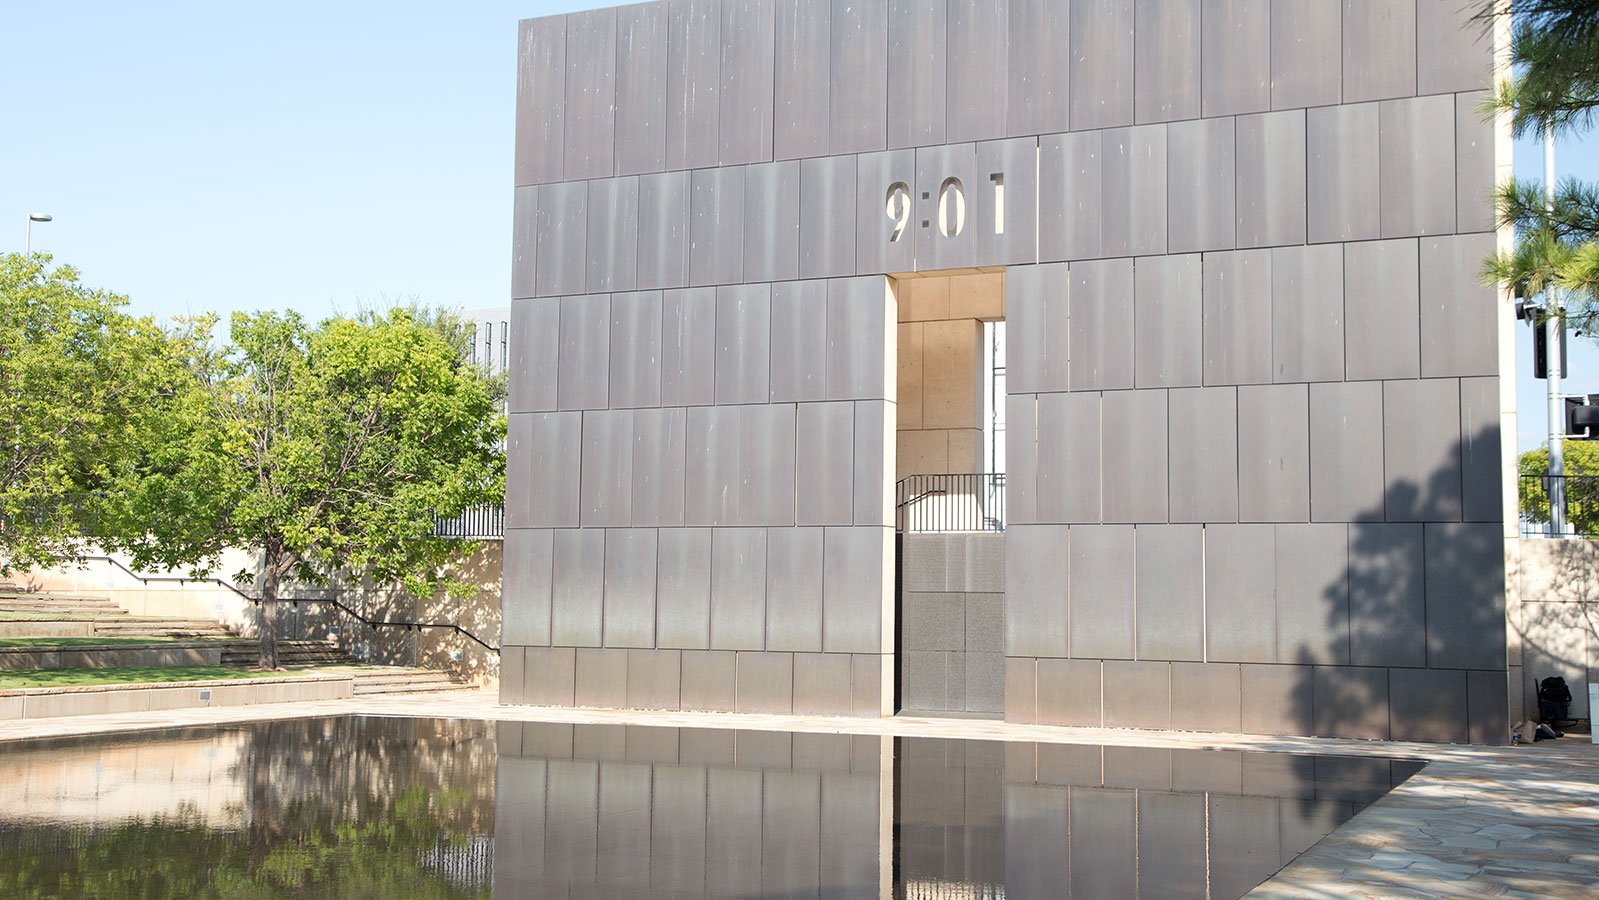 The Gates of Time, central elements of the Oklahoma City National Memorial, frame the moment of the blast